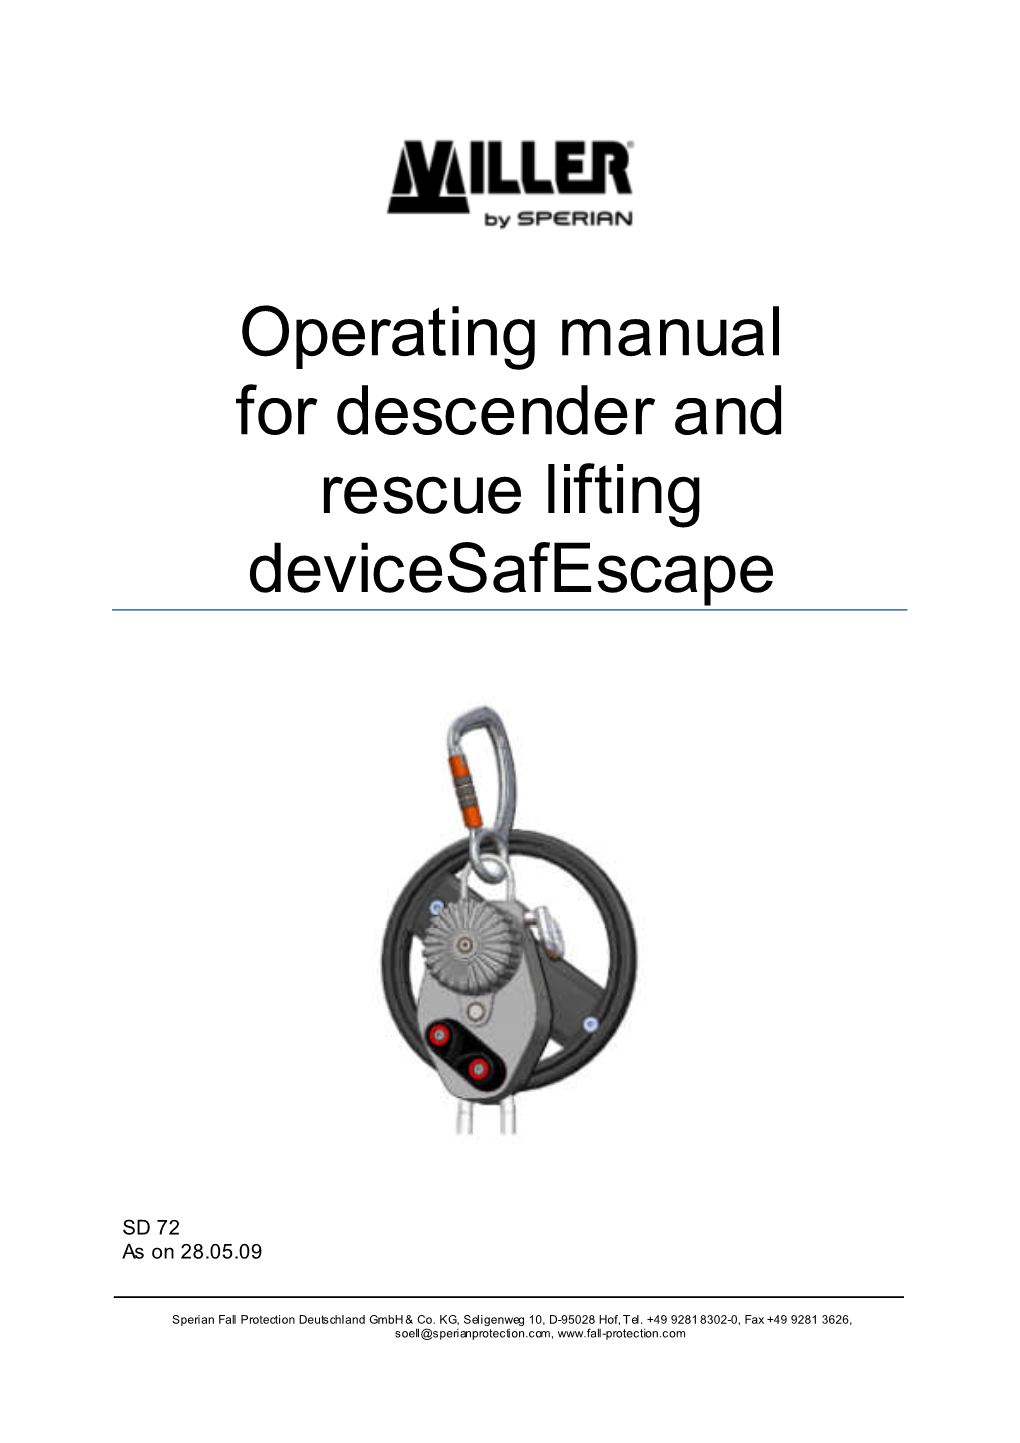 Operating Manual for Descender and Rescue Lifting Devicesafescape